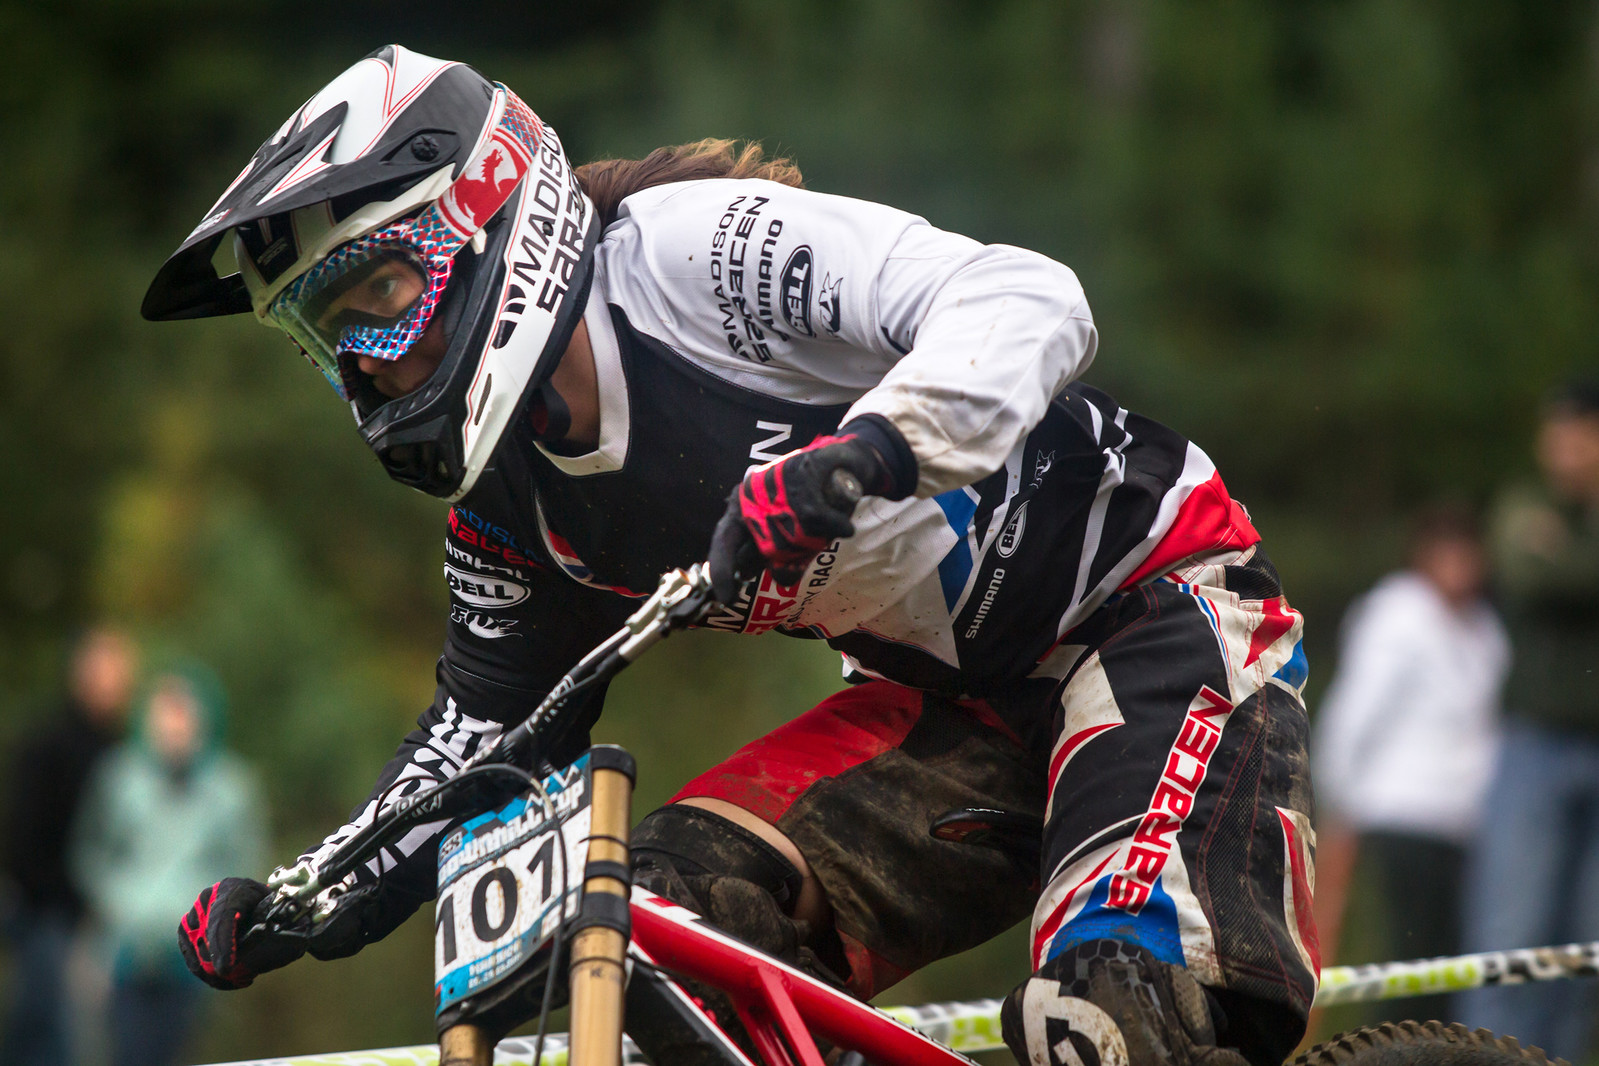 Ride players. Downhill Cup. IXS Shawn.